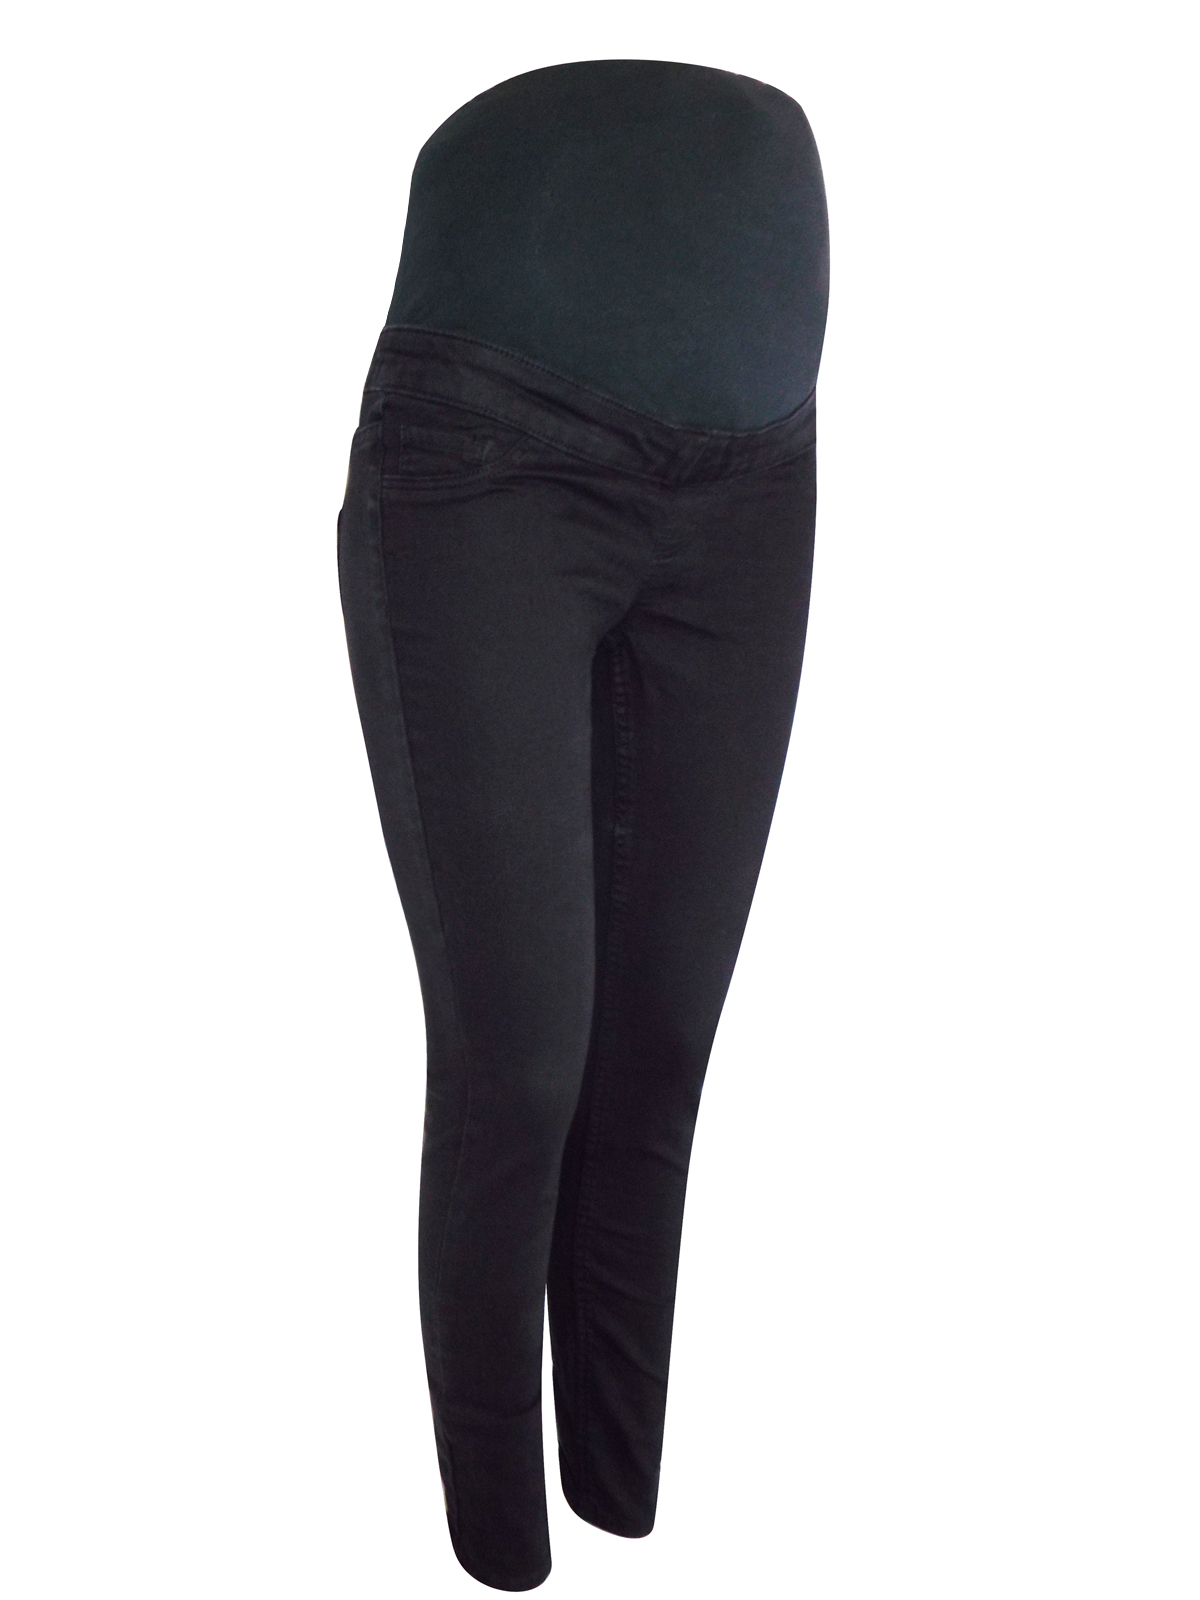 N3w L00k BLACK Over Bump Maternity Jeggings - Size 10 to 12